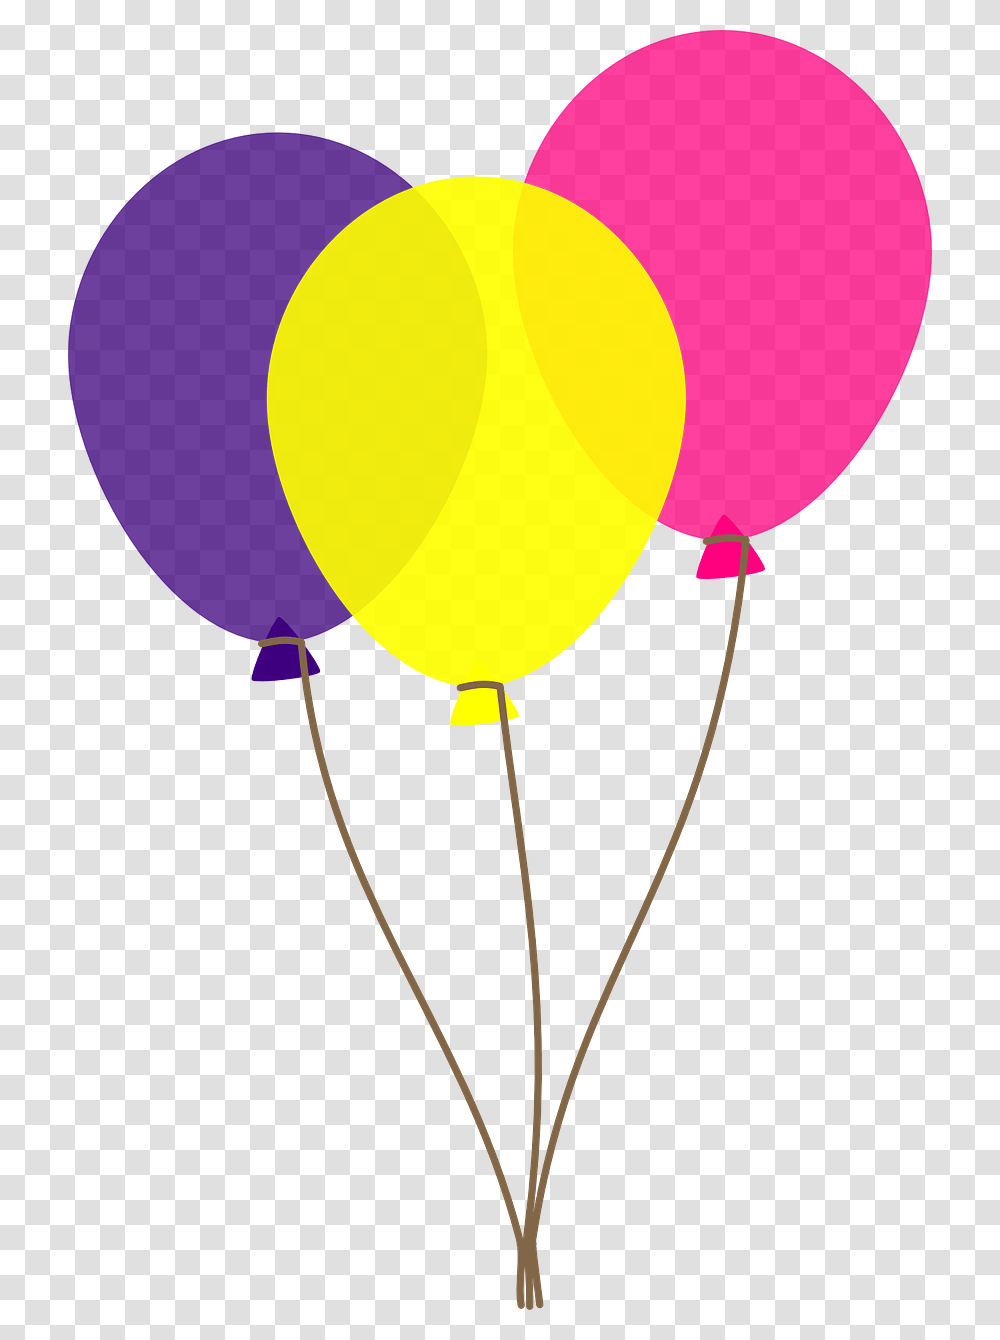 Balloon Free To Use Clip Art, Lamp Transparent Png